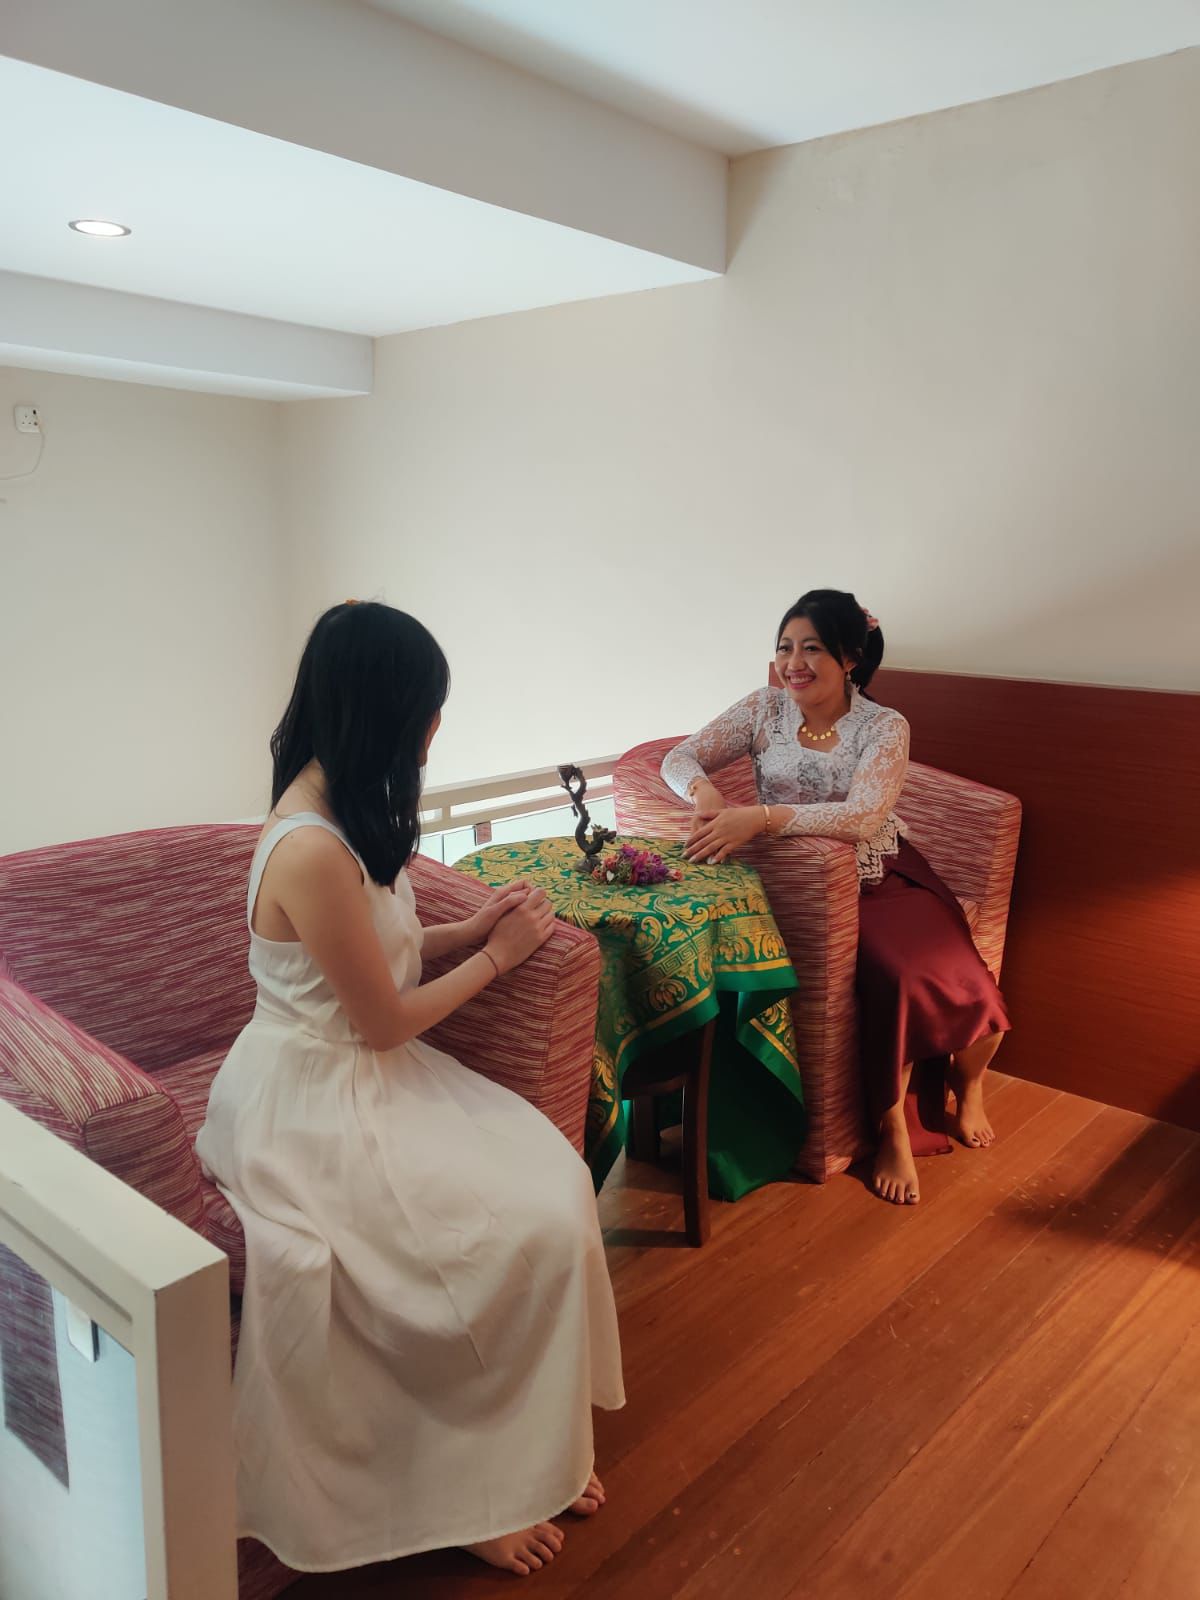 Bali Healer Jero Tya doing a healing session with a client.